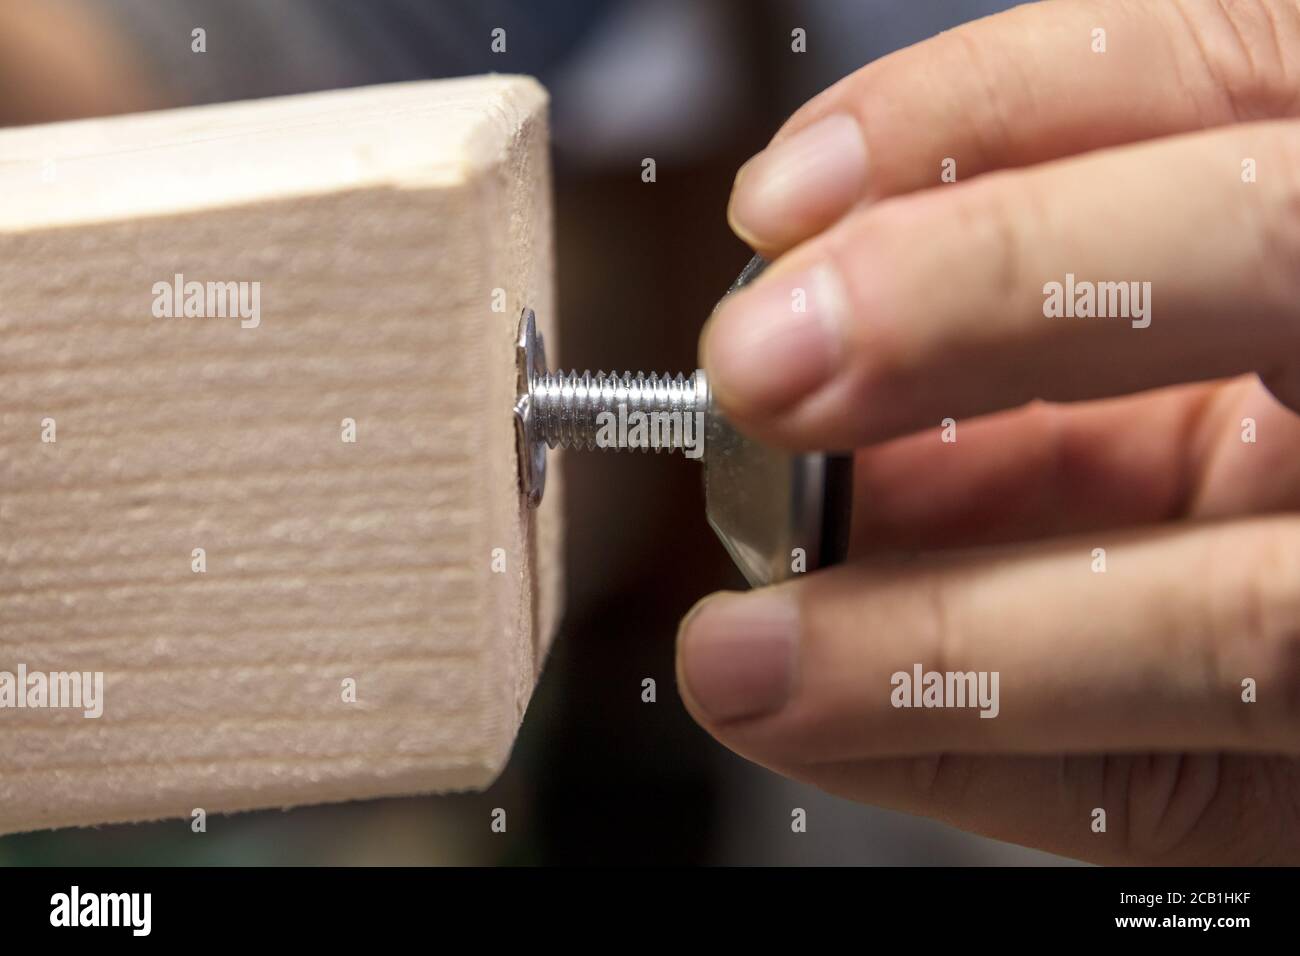 Man is installing a adjustable variable screw in a wooden desk or table leg Stock Photo